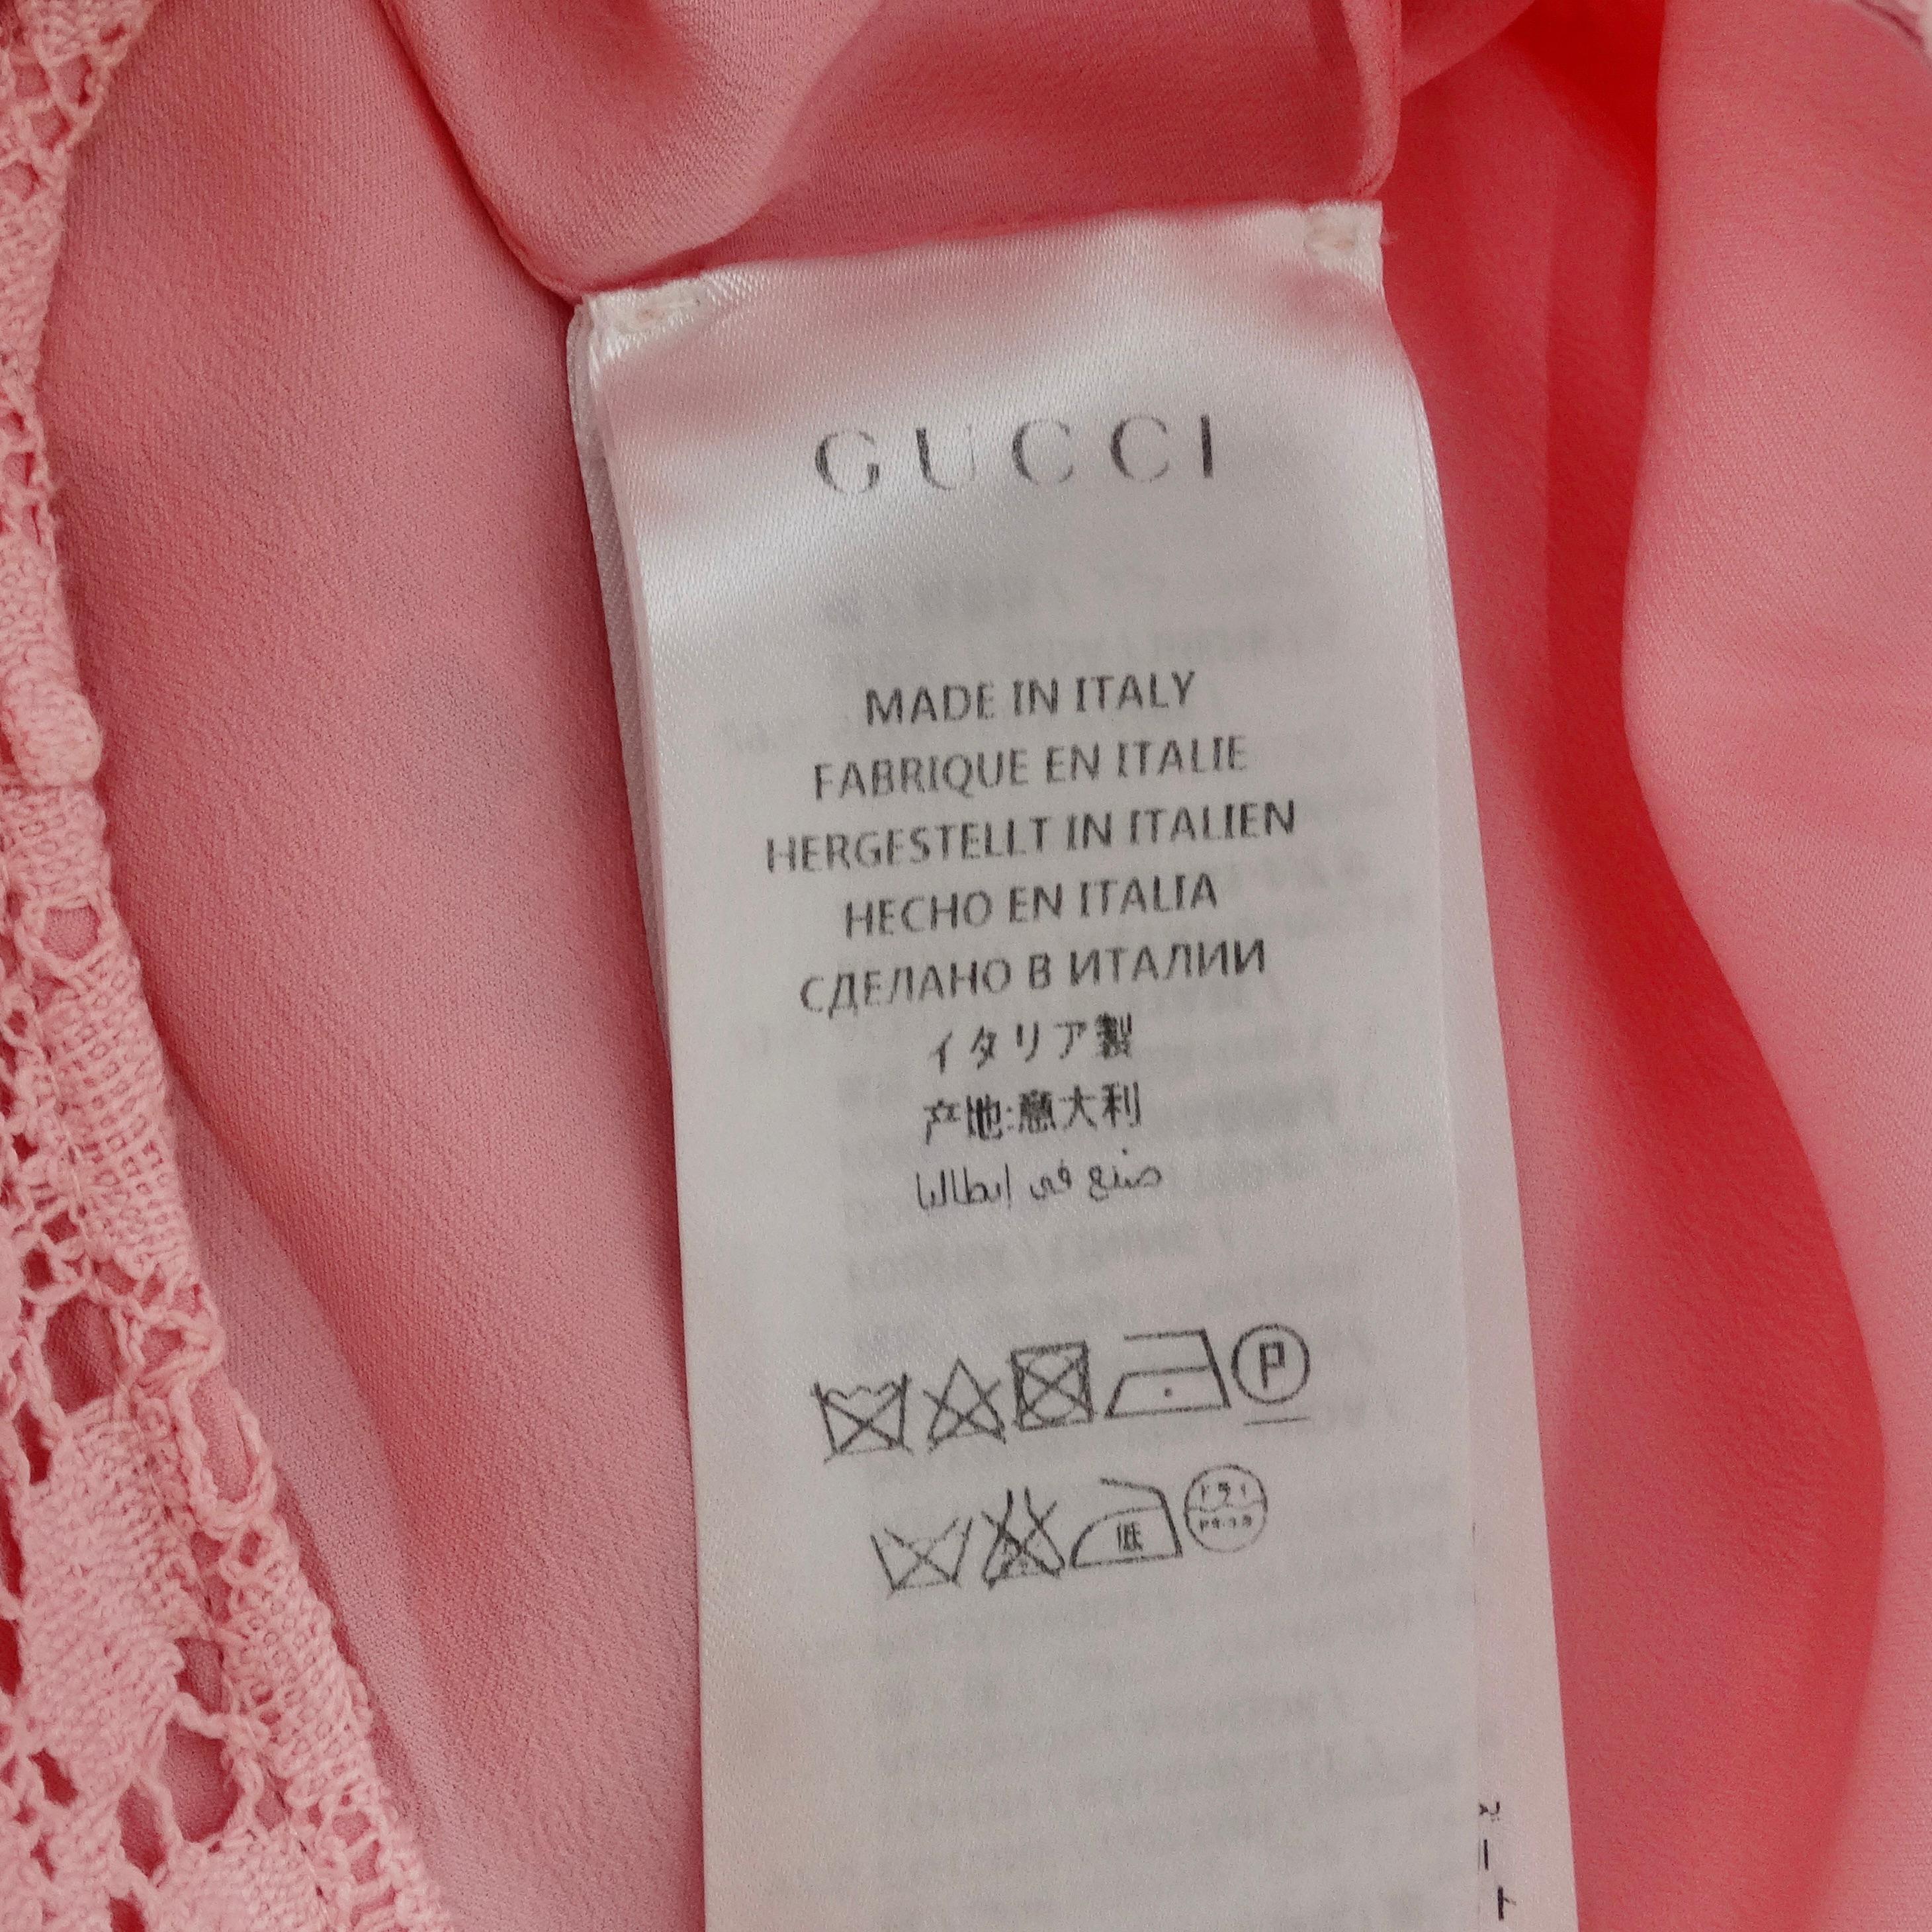 Gucci Cluny Lace Dress in Rose 6